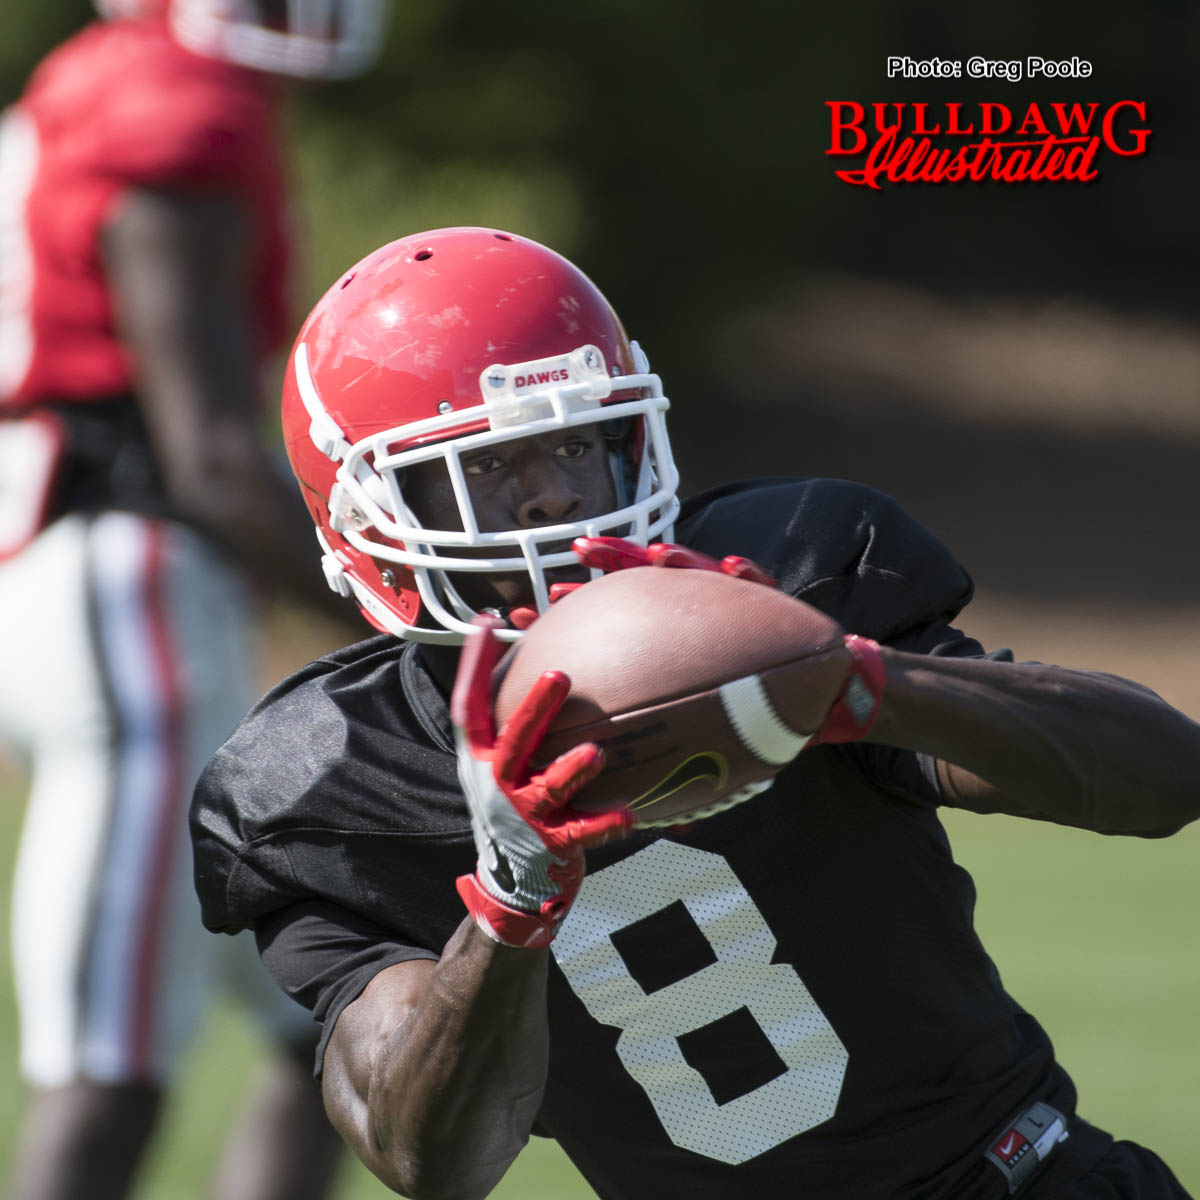 Sophomore WR Riley Ridley hauls in a pass from from QB Jacob Eason during Georgia's 10th practice of spring